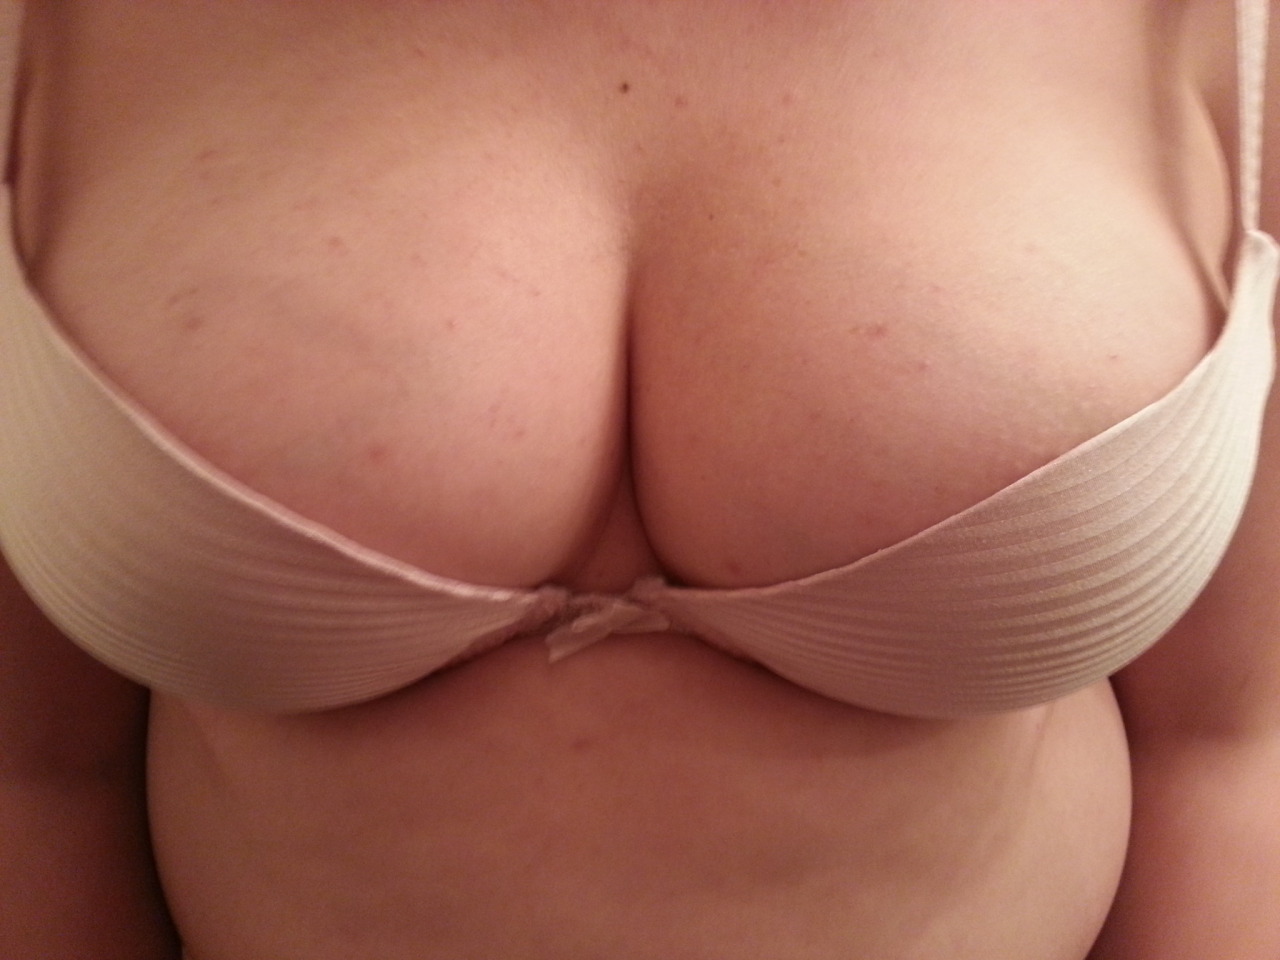 aisman7:  sharingwifefl: amateur wife’s boobs and nipples…Re-Blog and like if